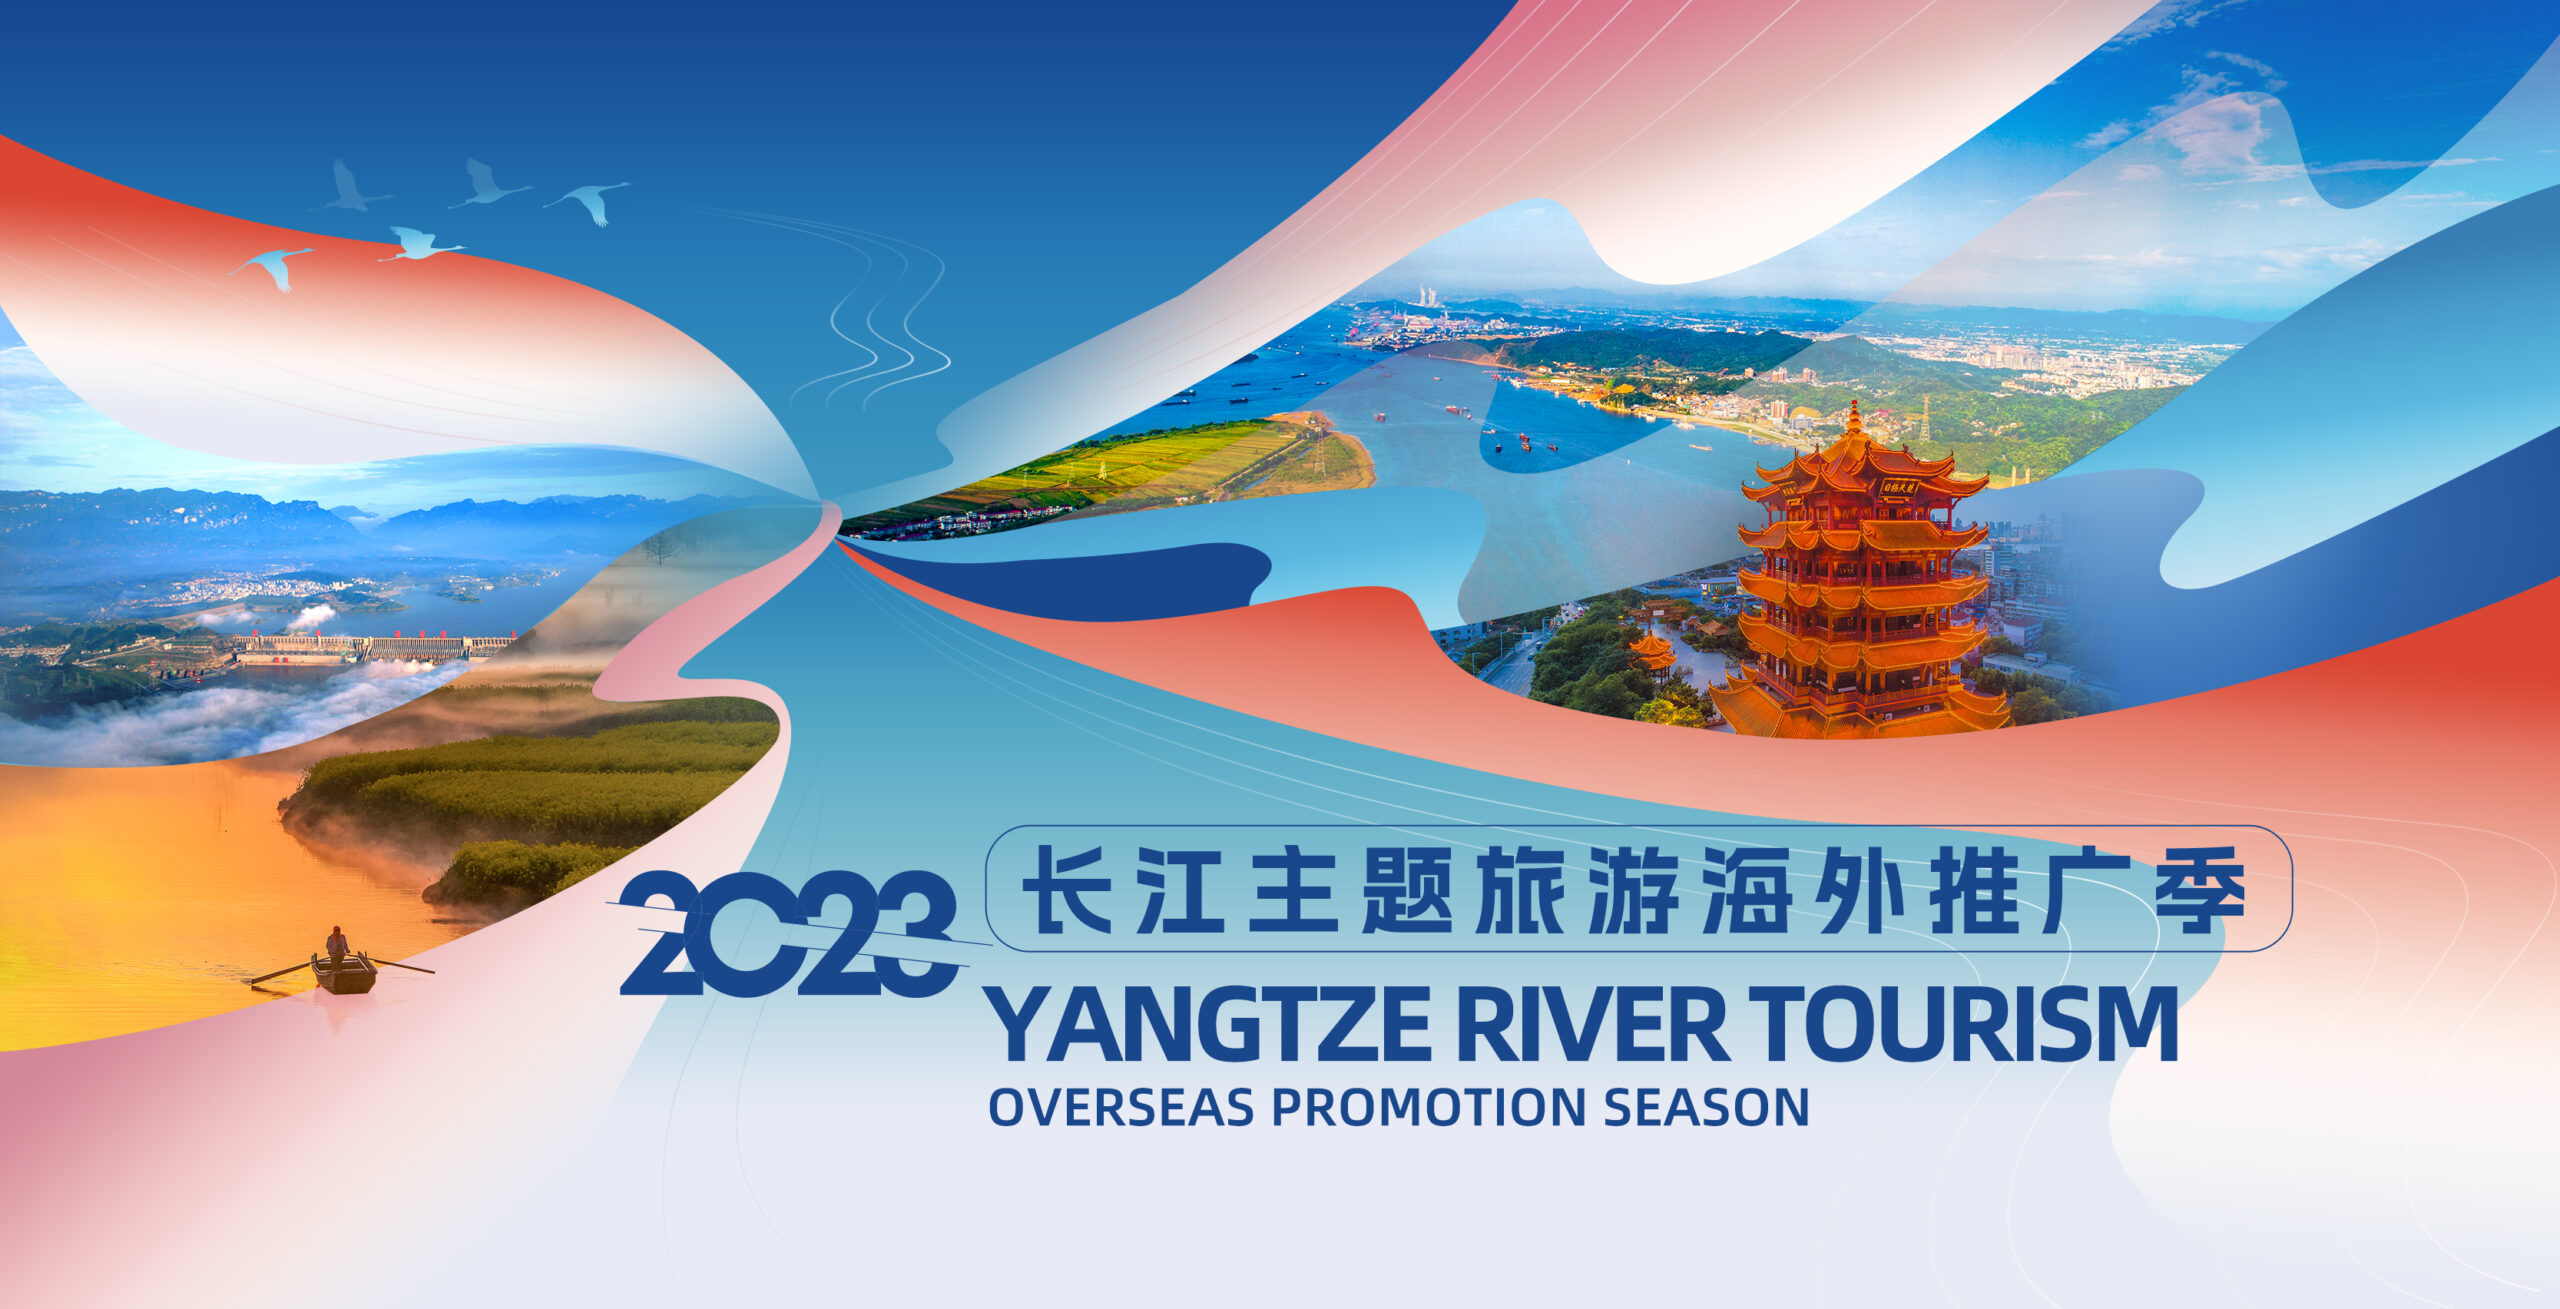 China Tourism Day – Discover the Beauty of the Yangtze River